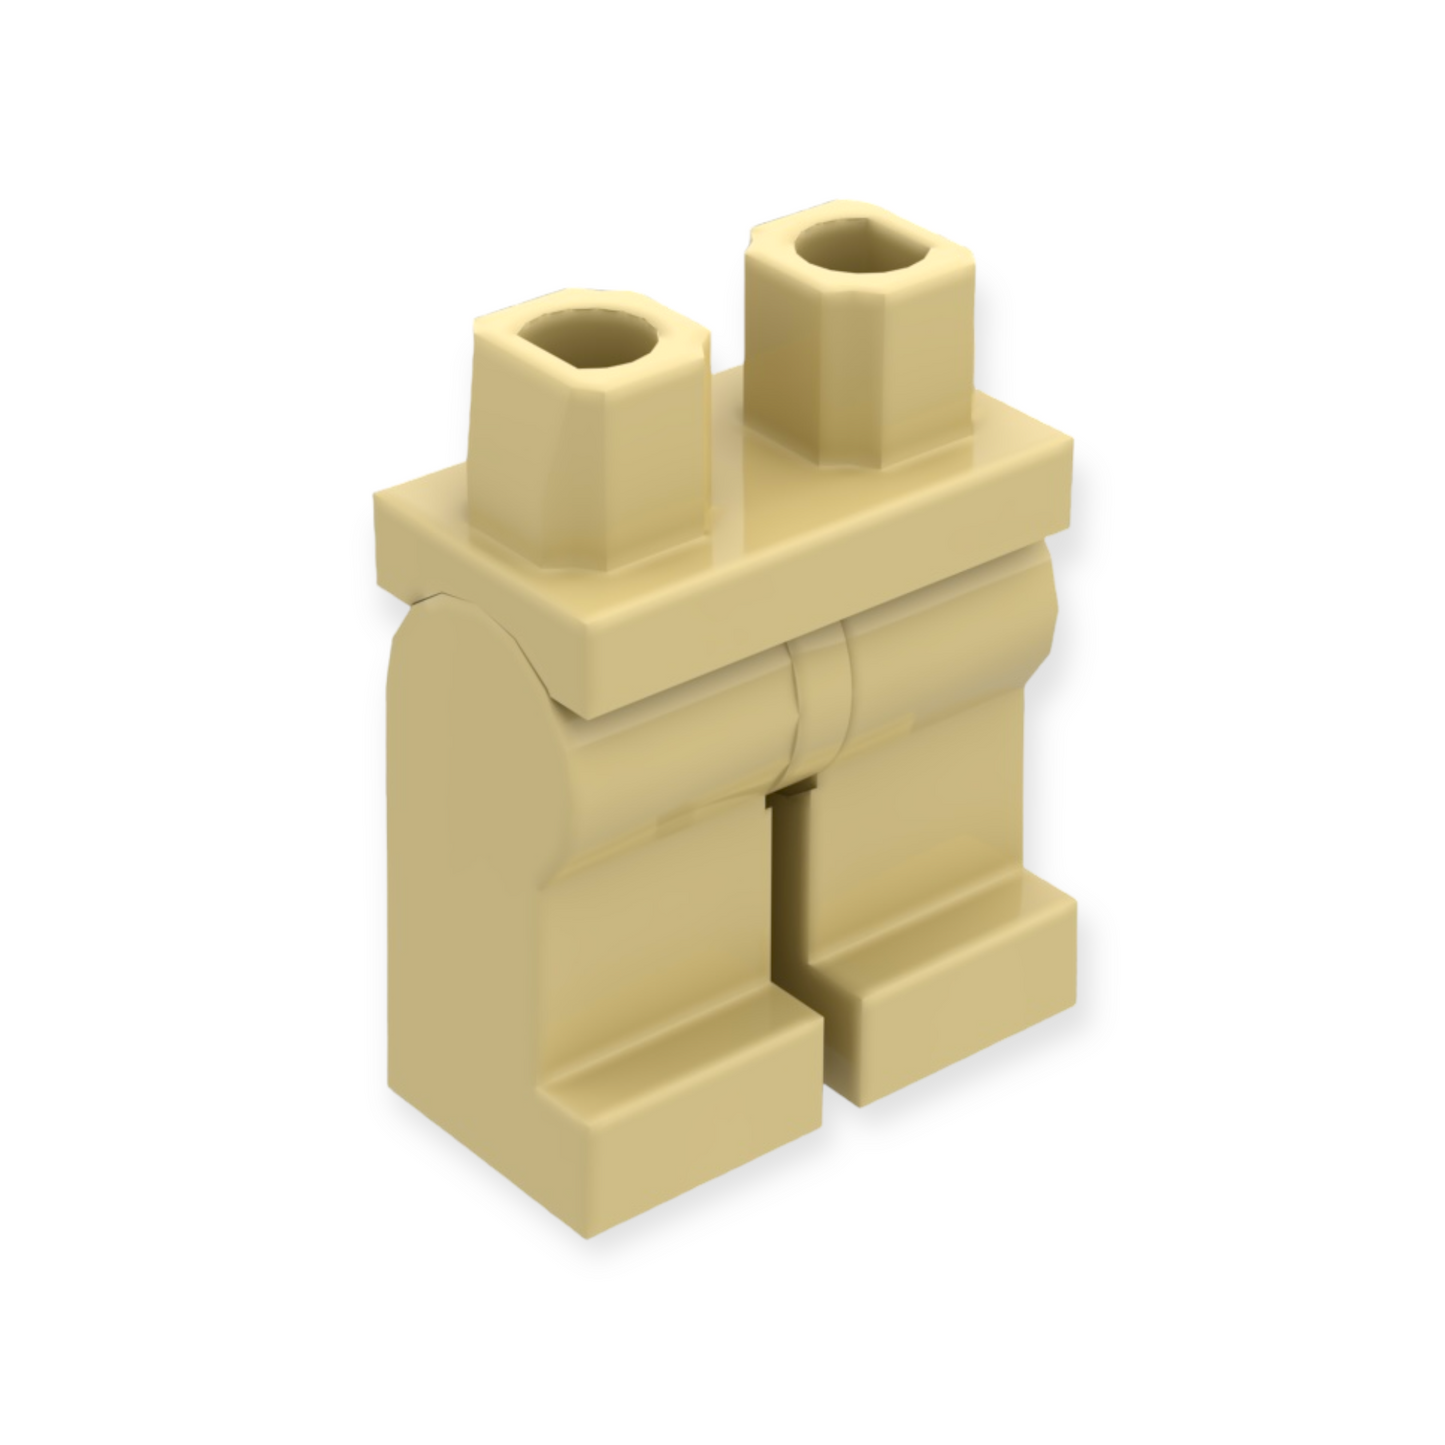 LEGO Hips and Legs - Tan